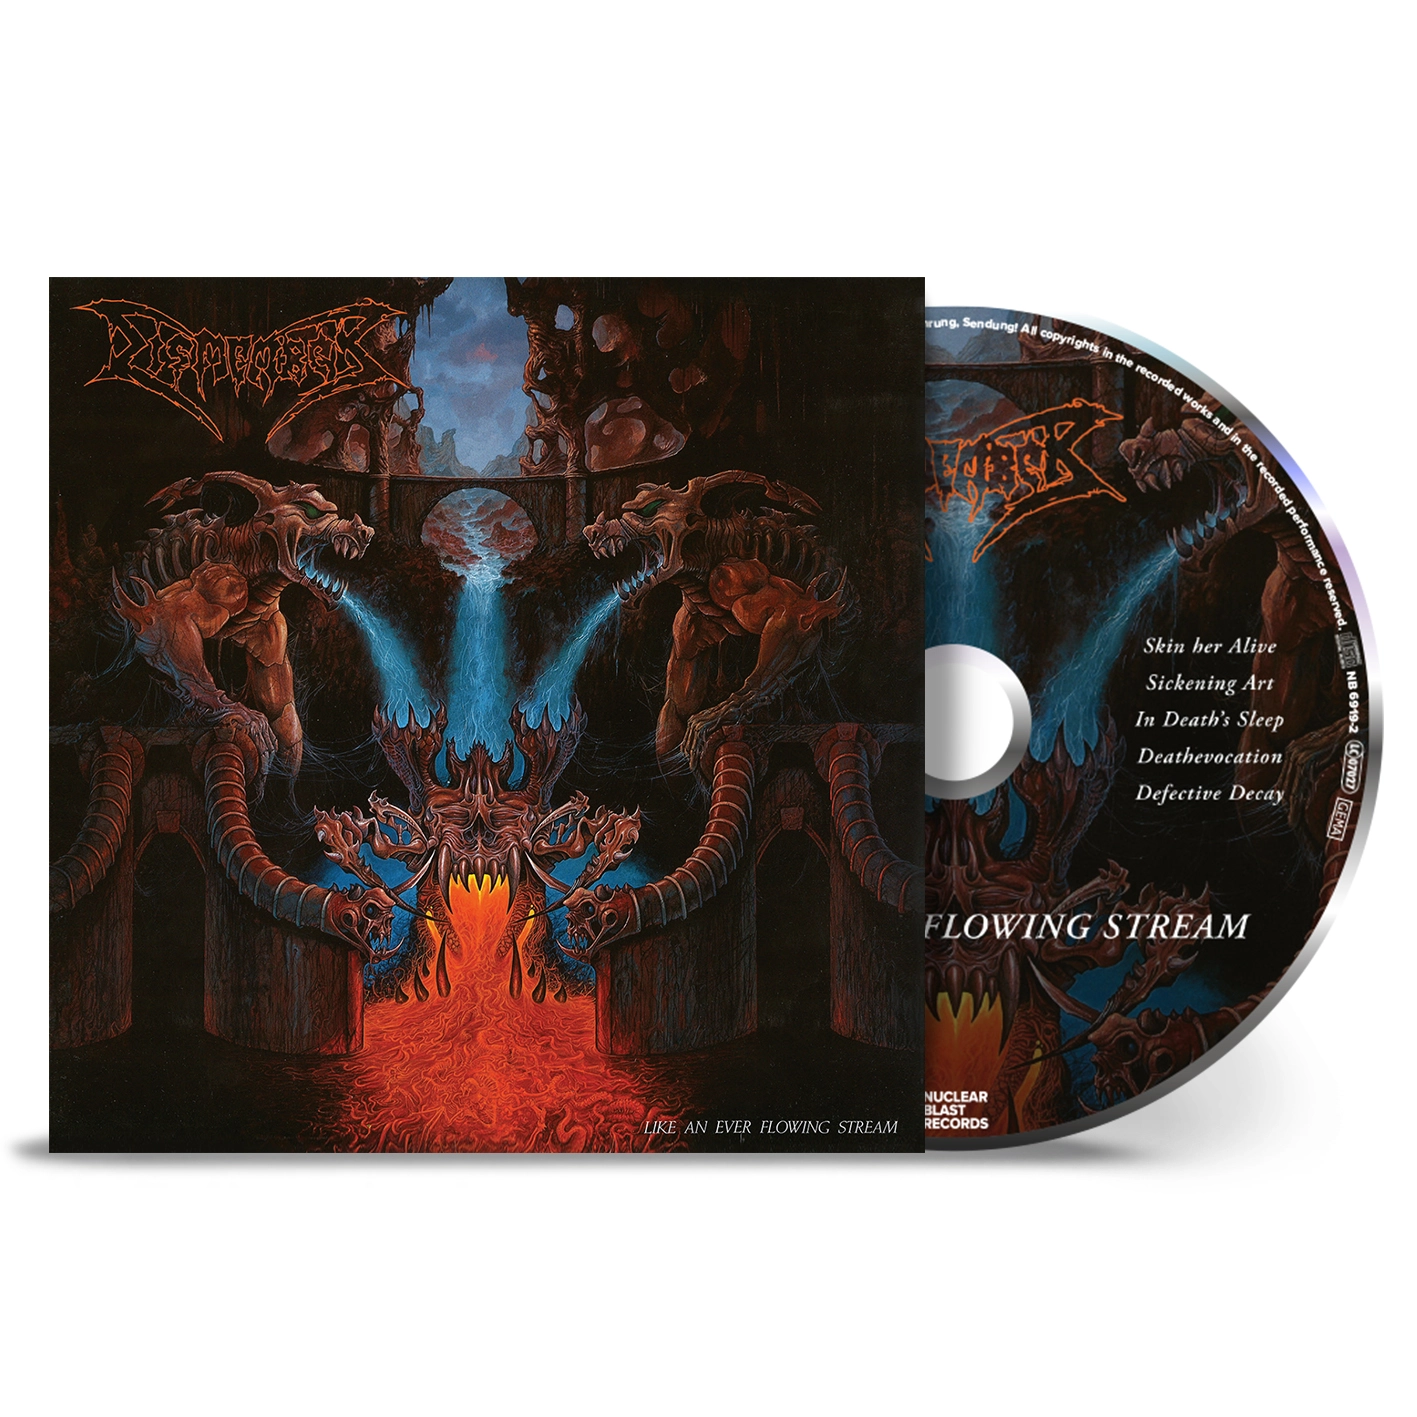 DISMEMBER - Like An Ever Flowing Stream [CD]